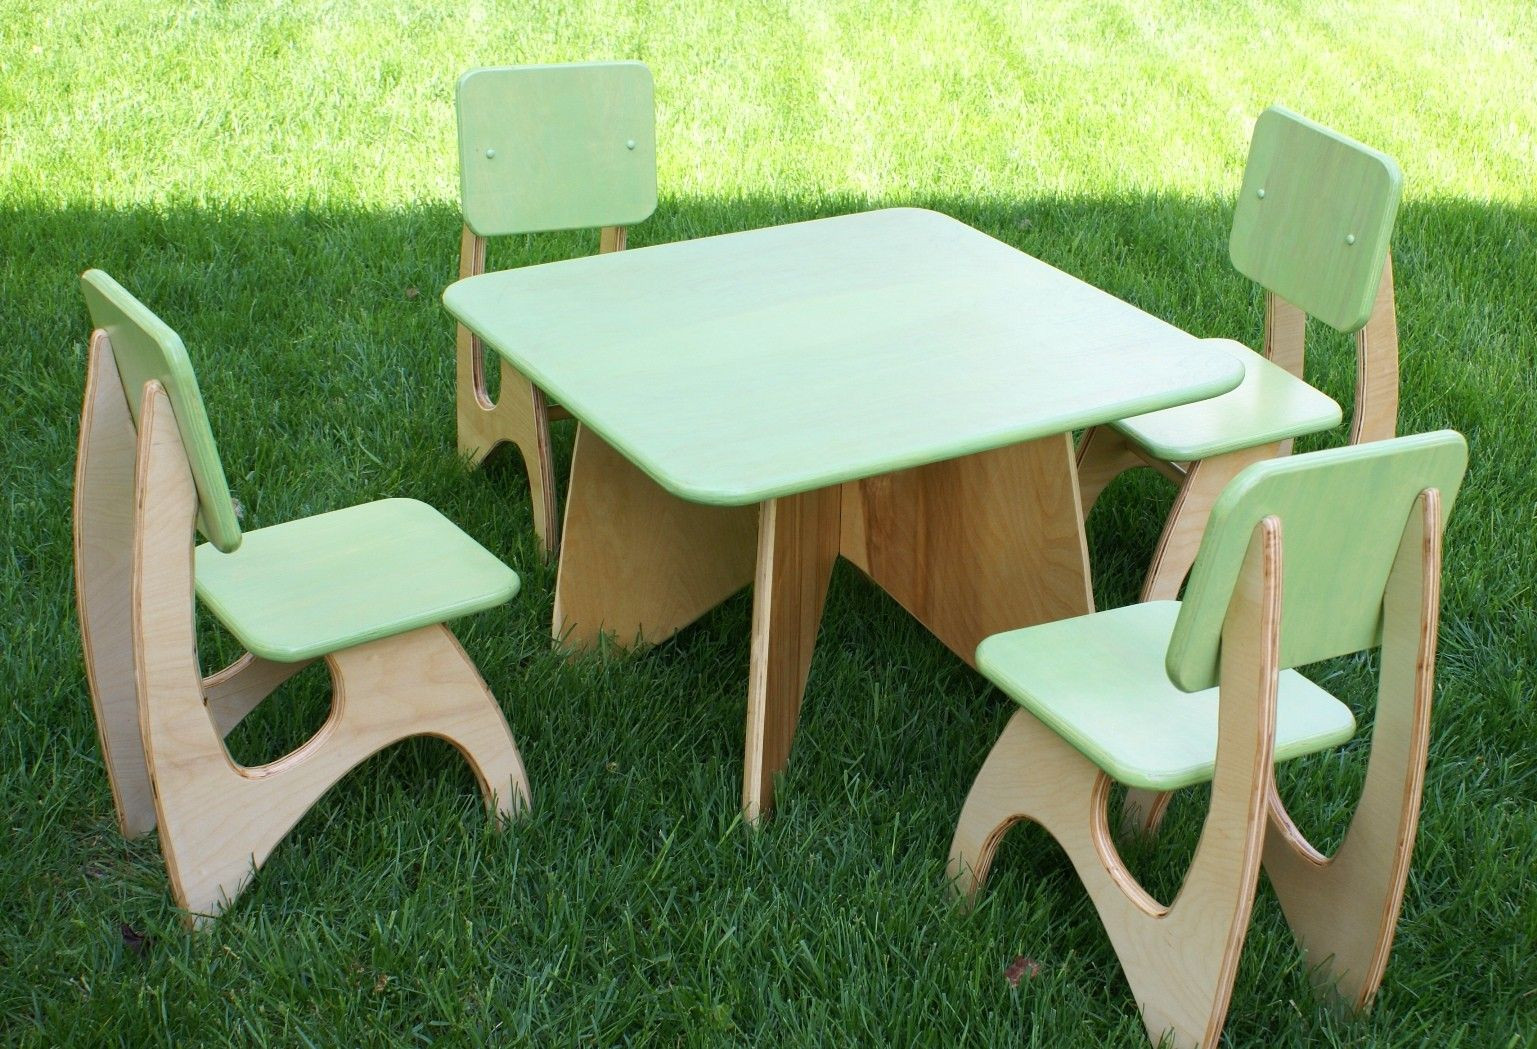 Modern Kids Table And Chair
 Modern Child and Table set 2 chair option